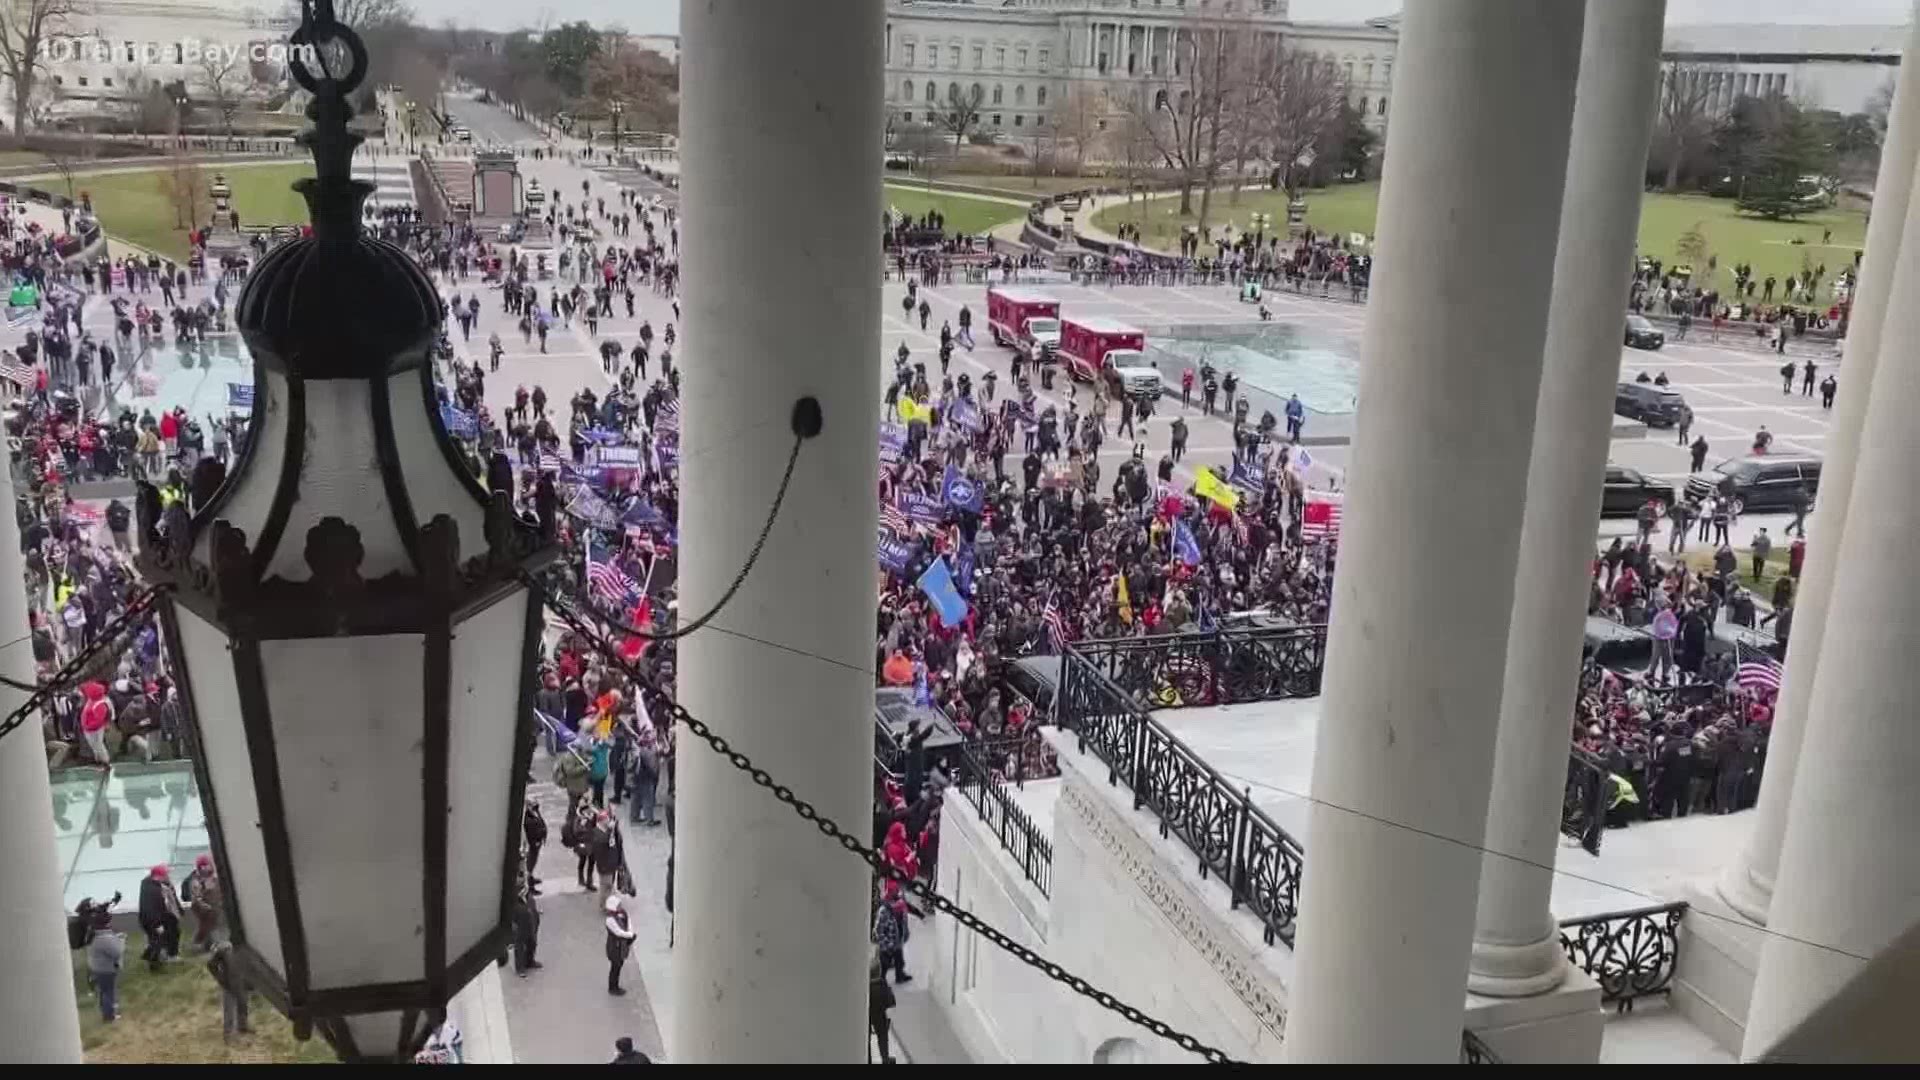 The ceremonial proceedings to affirm President-elect Joe Biden's victory were interrupted when a violent mob of Trump supporters stormed the Capitol.